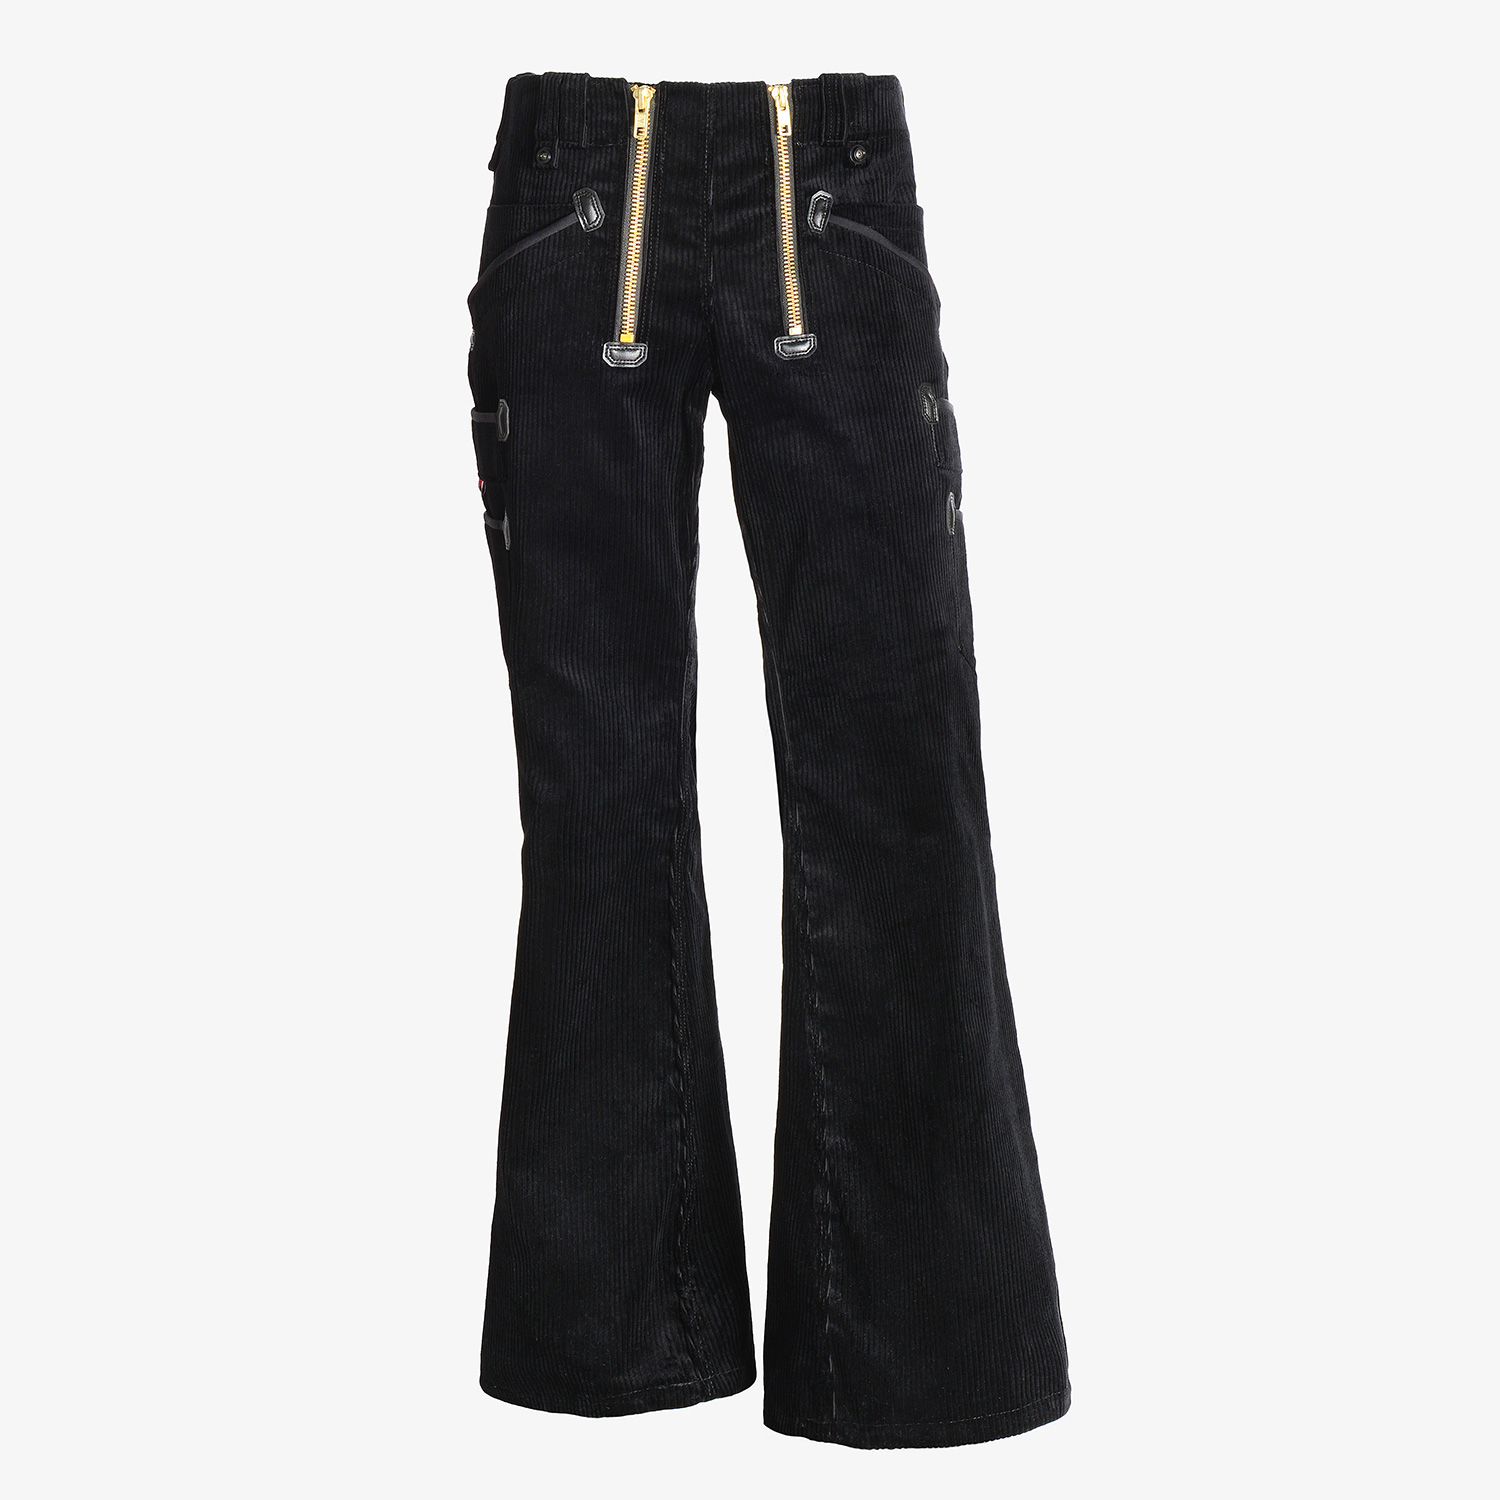 KLUFT carpenter trousers with bell bottom